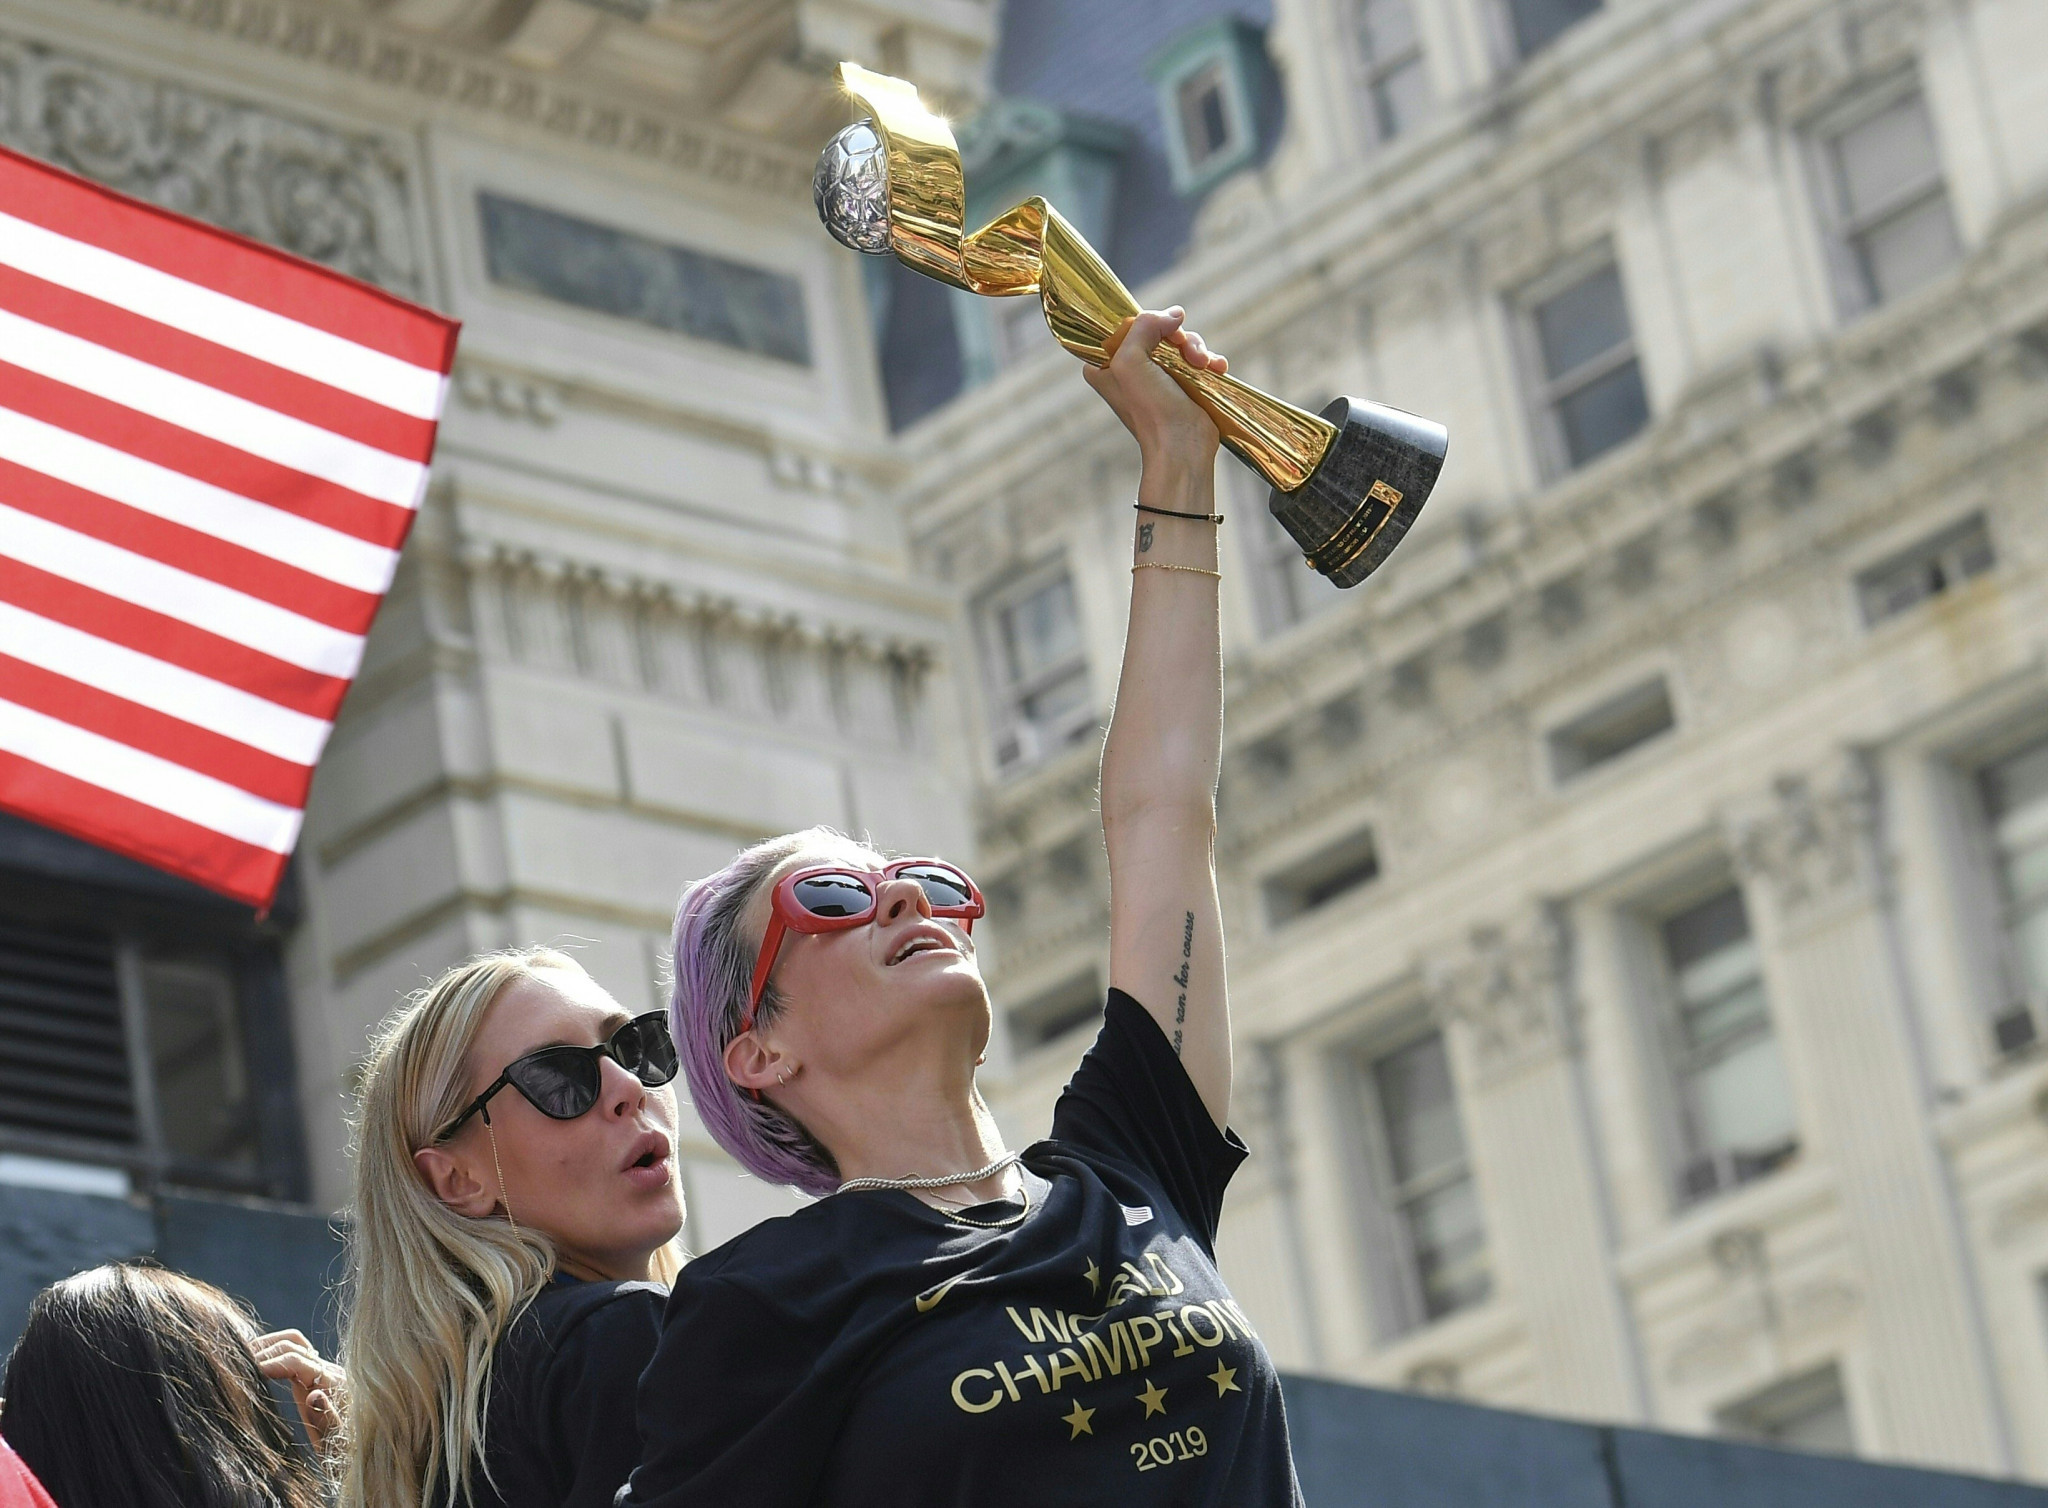 Megan Rapinoe was a key figure in the legal dispute ©Getty Images